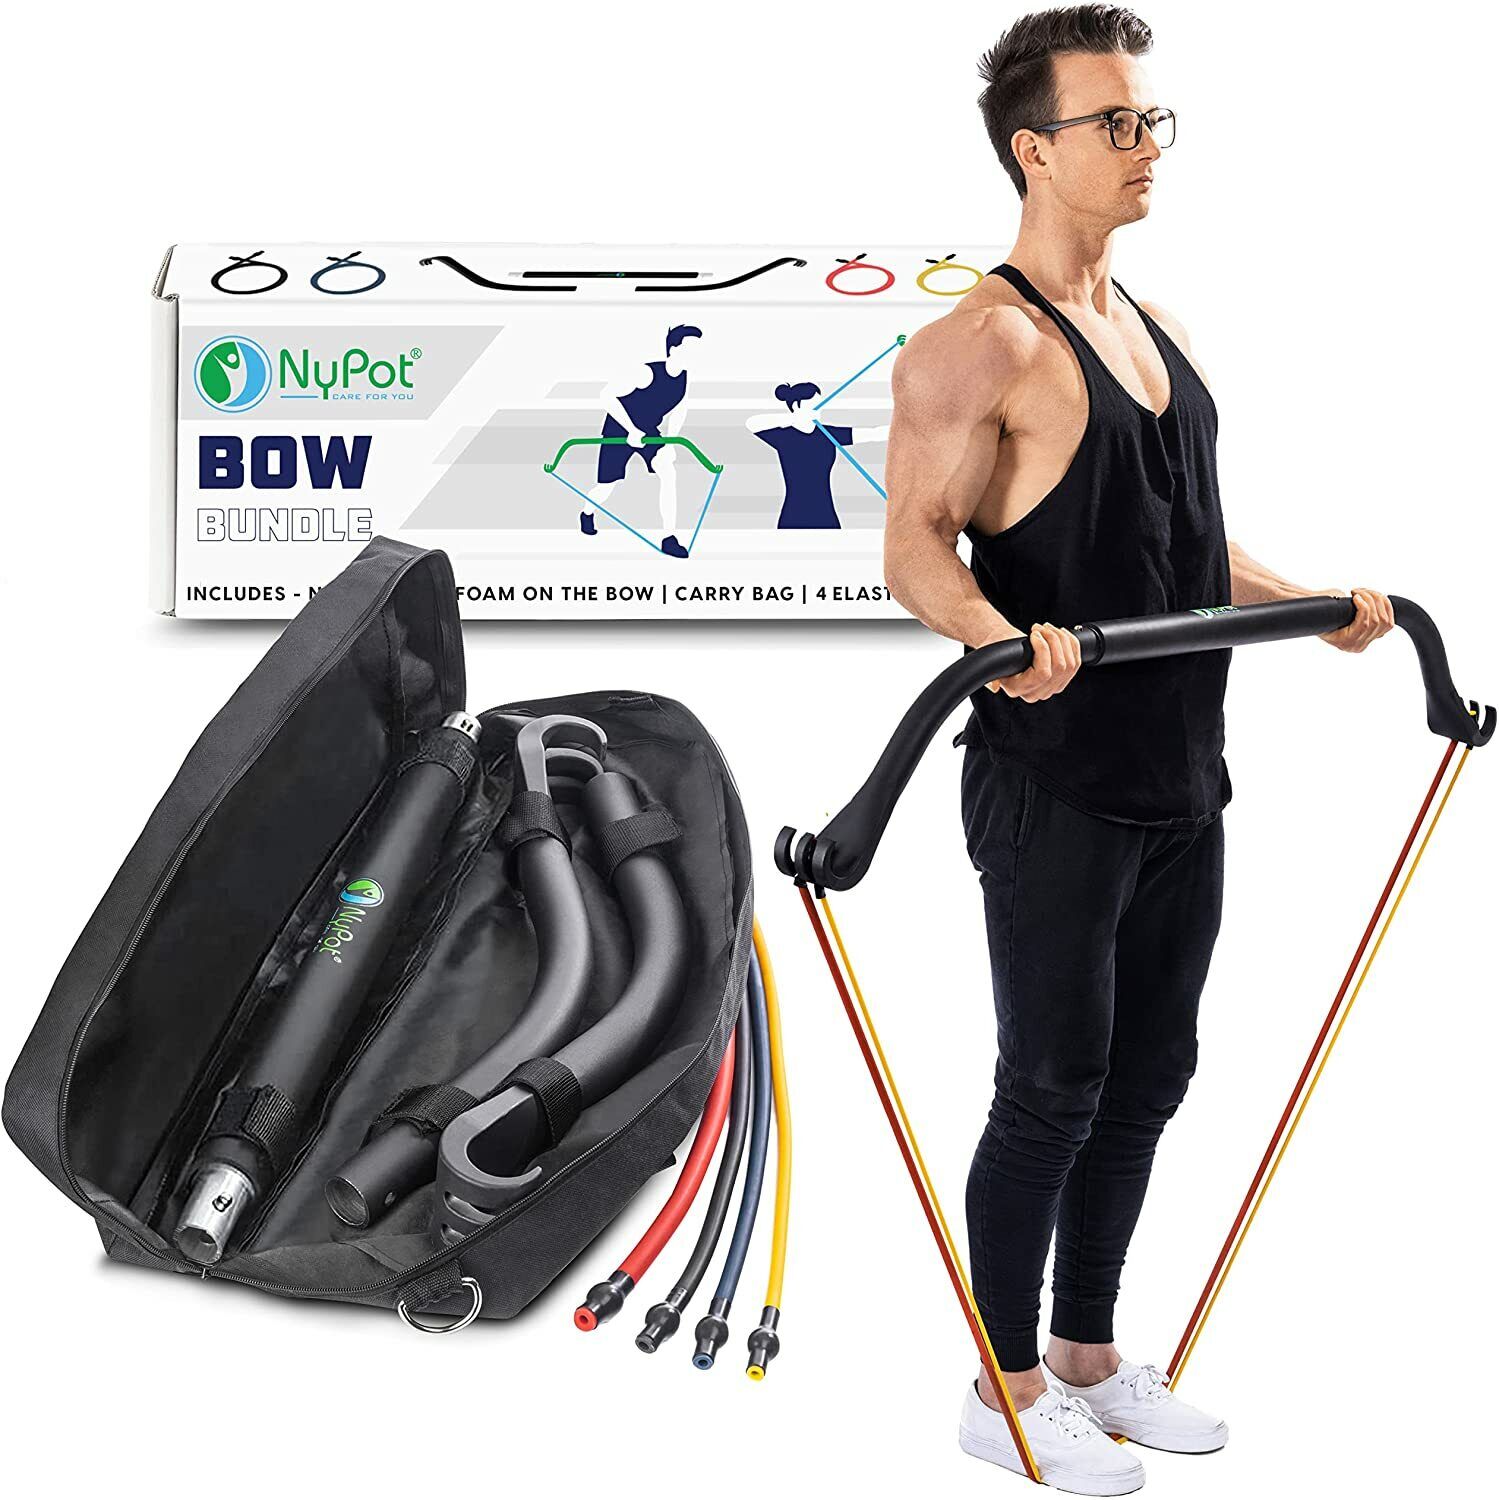 Politiebureau koel Slaapzaal Bow Portable Home Gym Resistance Band and Bar System Travel Workout  Equipment S | eBay